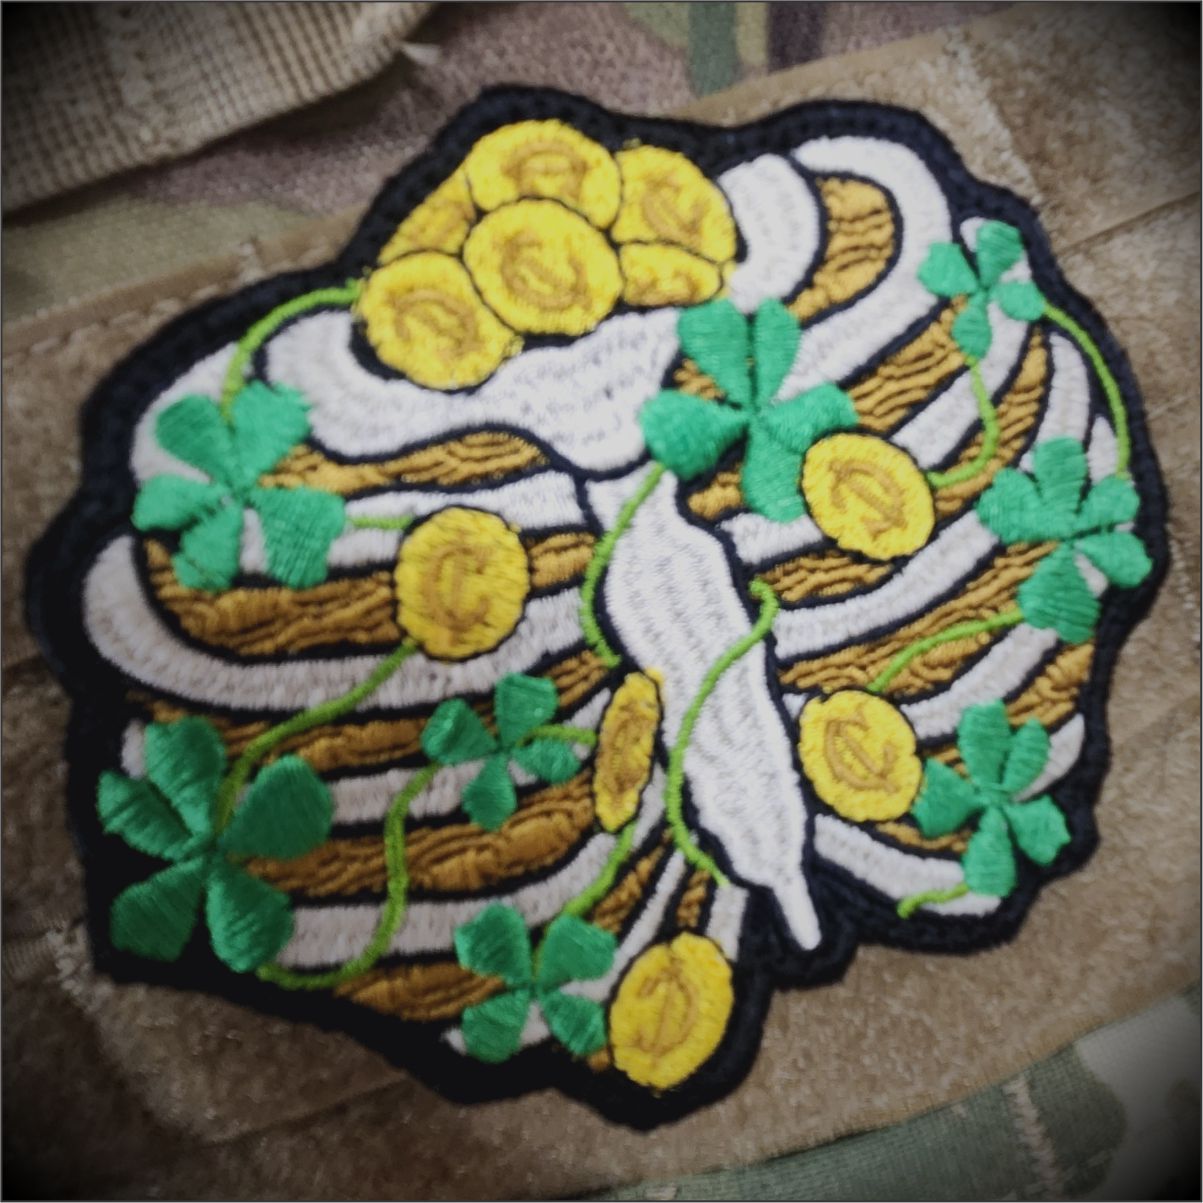 Ribcage Pot of Gold Coins 4 leaf clover  - 4" Embroidered Patch - No Lucks Given Collection